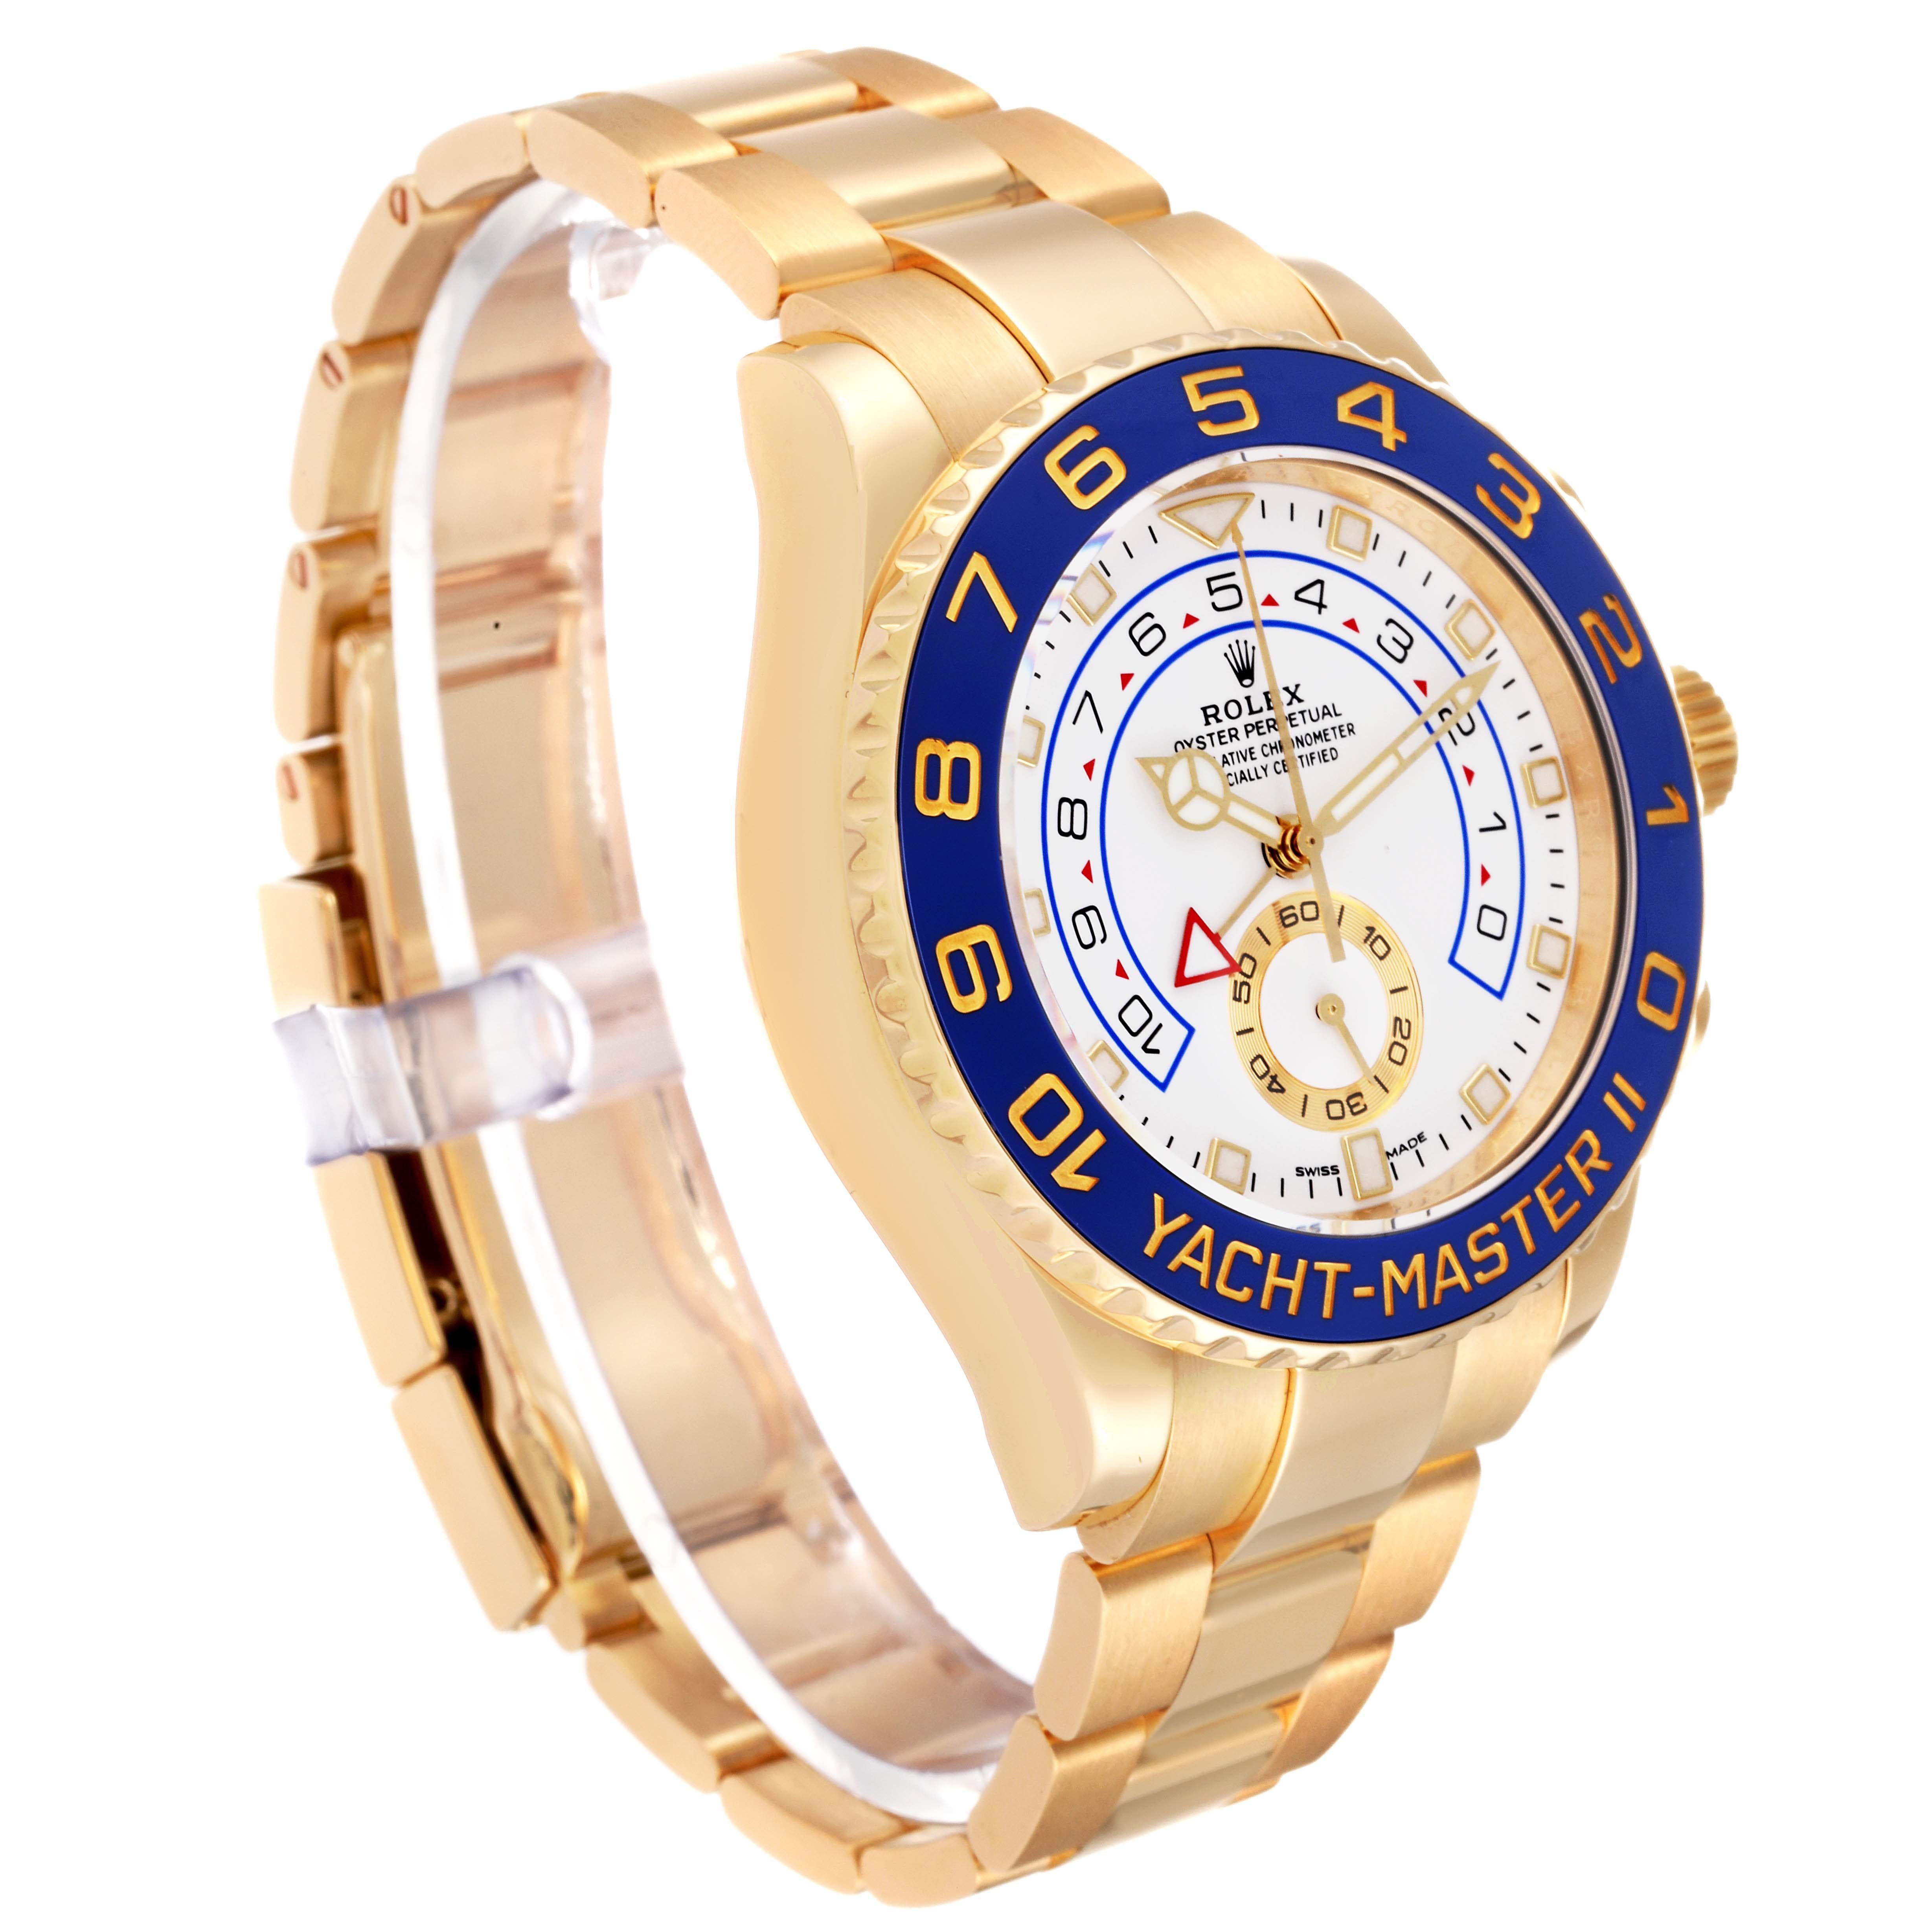 Rolex Yachtmaster II Regatta Chronograph Yellow Gold Men's Watch 116688 Box Card In Excellent Condition For Sale In Atlanta, GA